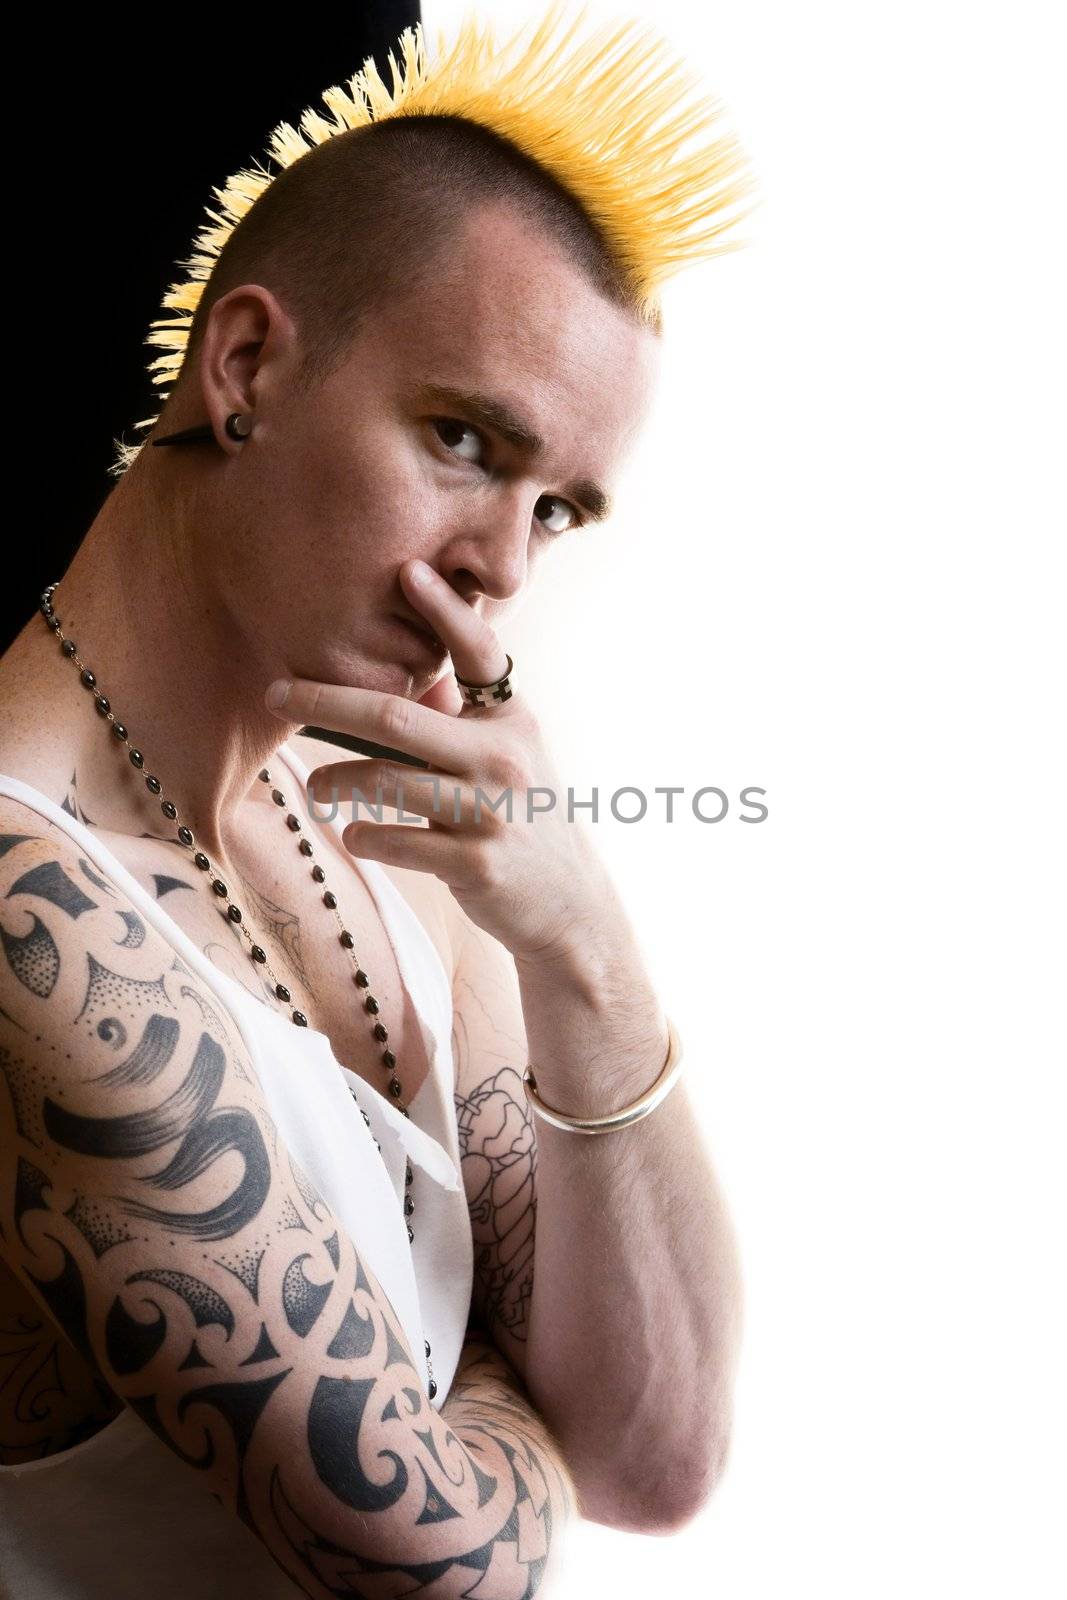 Man with a tall yellow Mohawk hairstyle